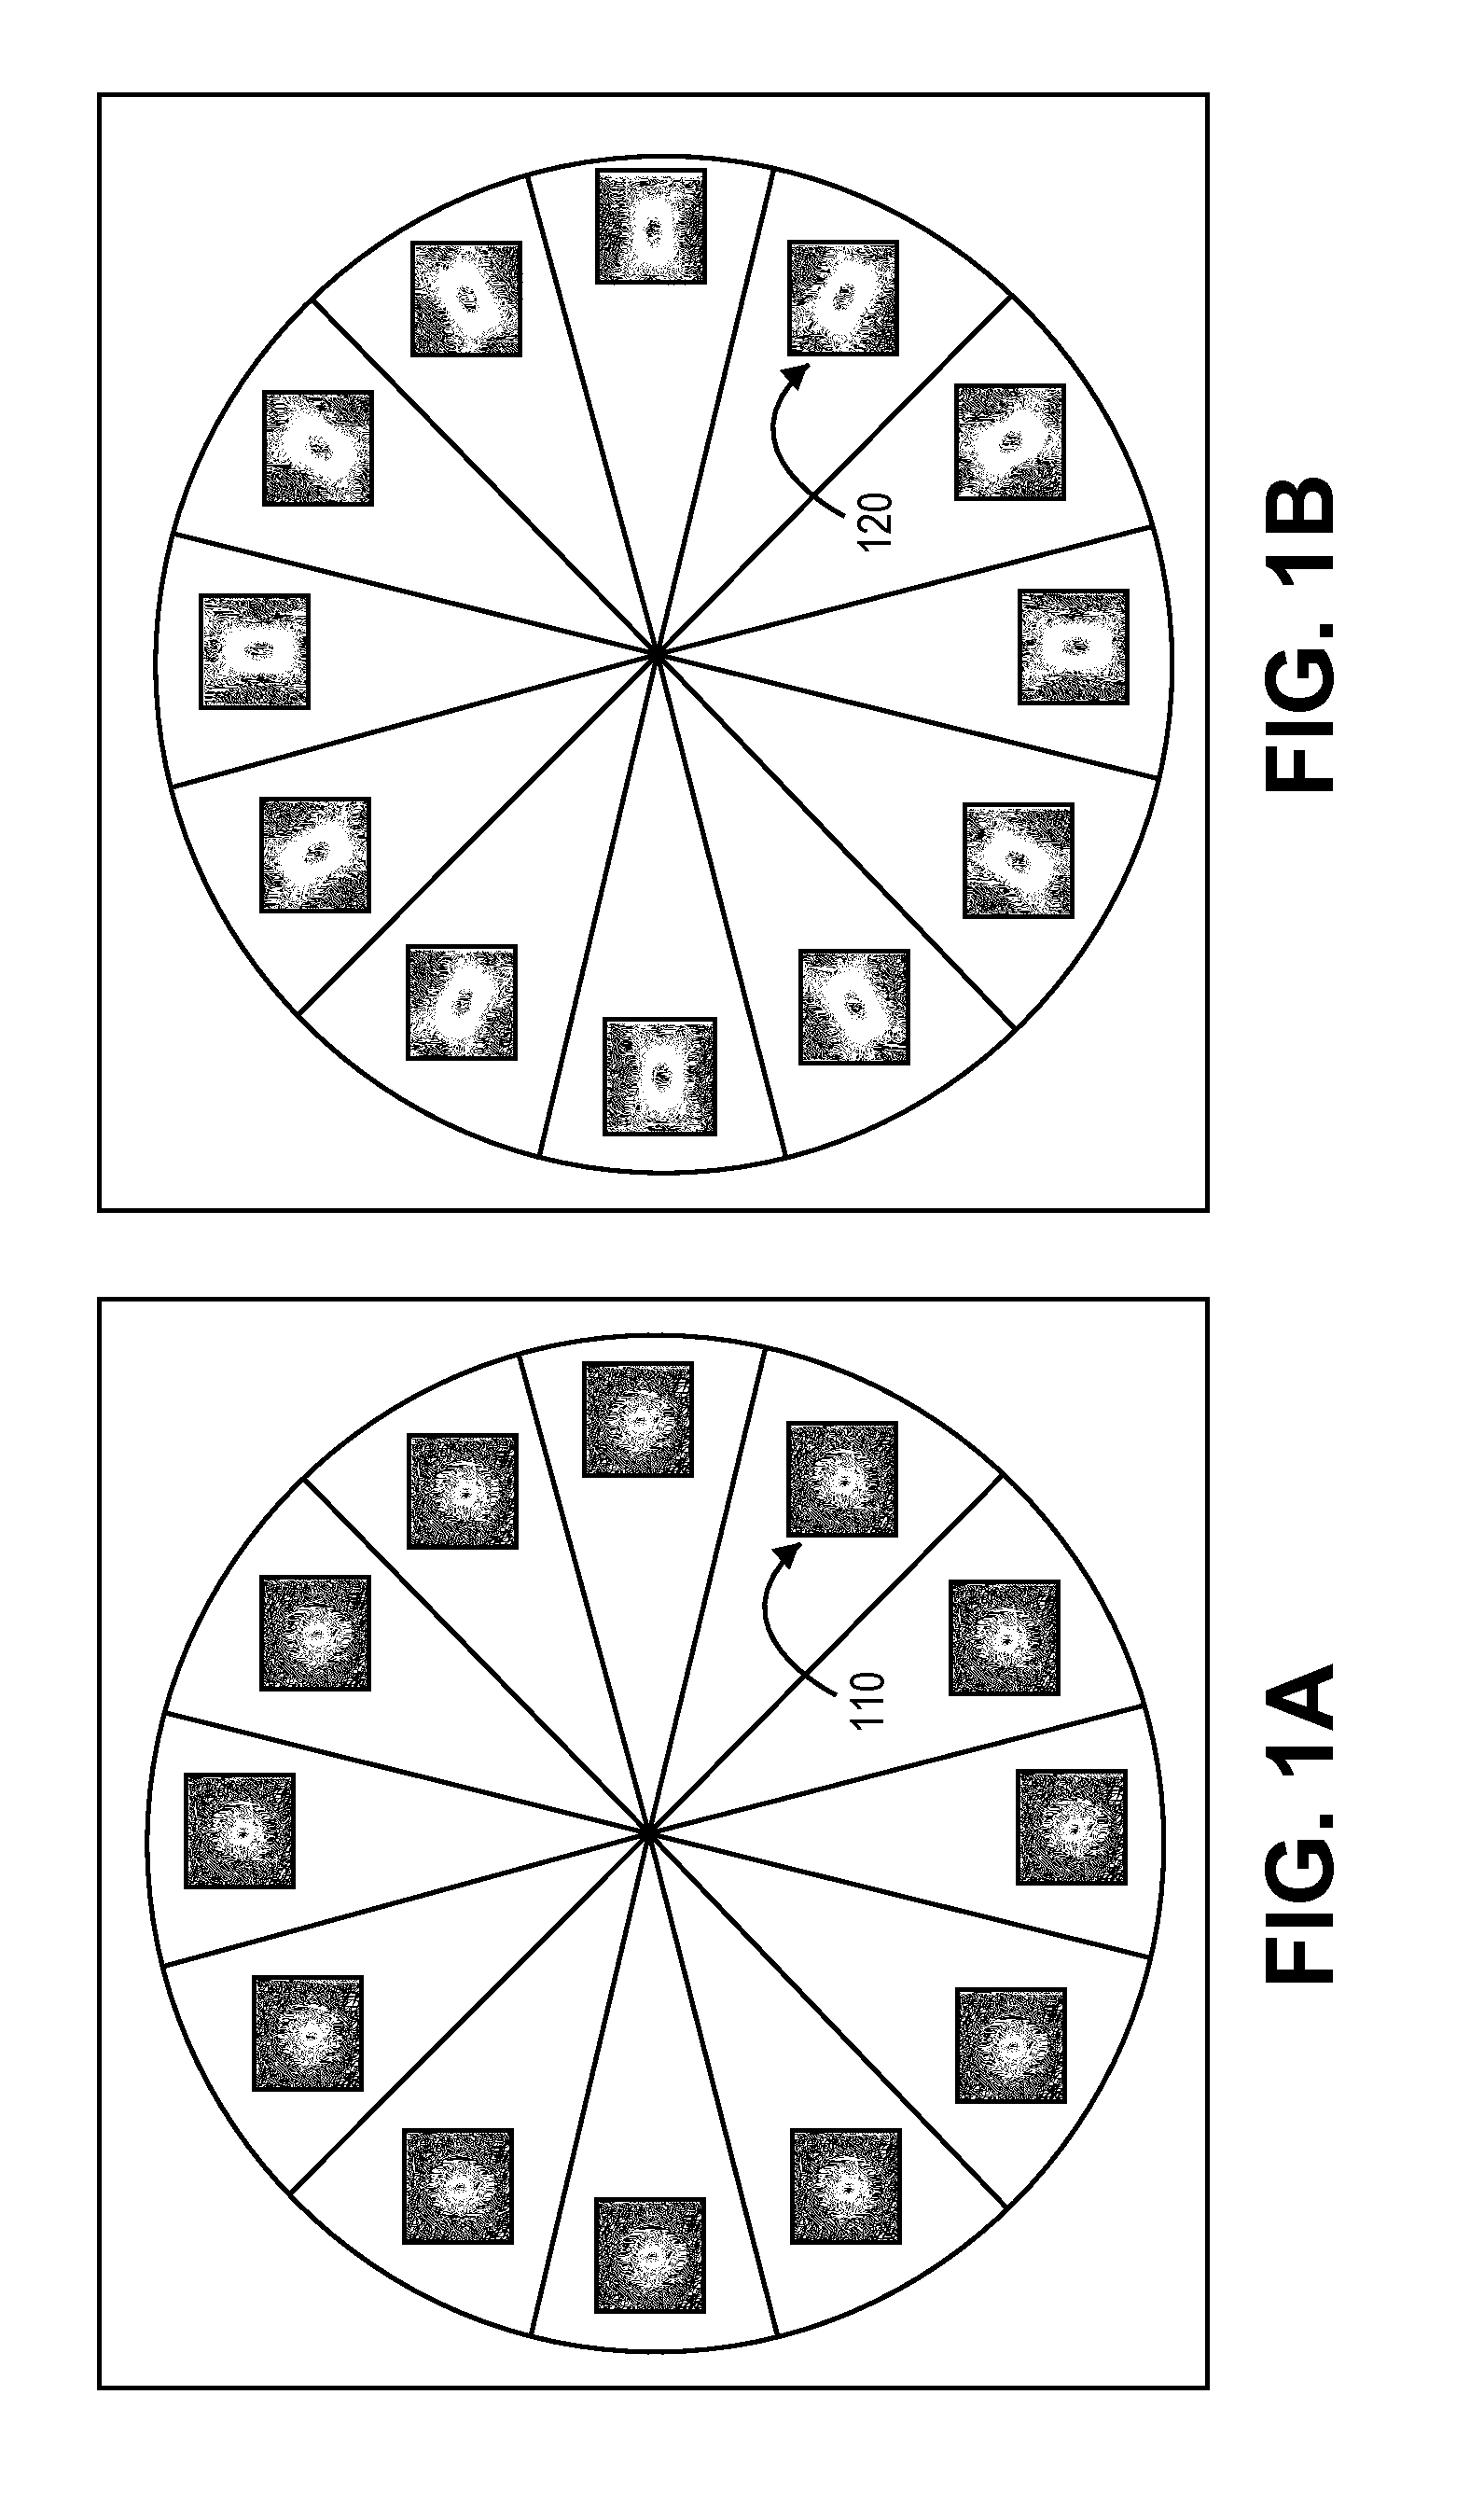 Method and Apparatus for FIR Filtering Using Space-Varying Rotation